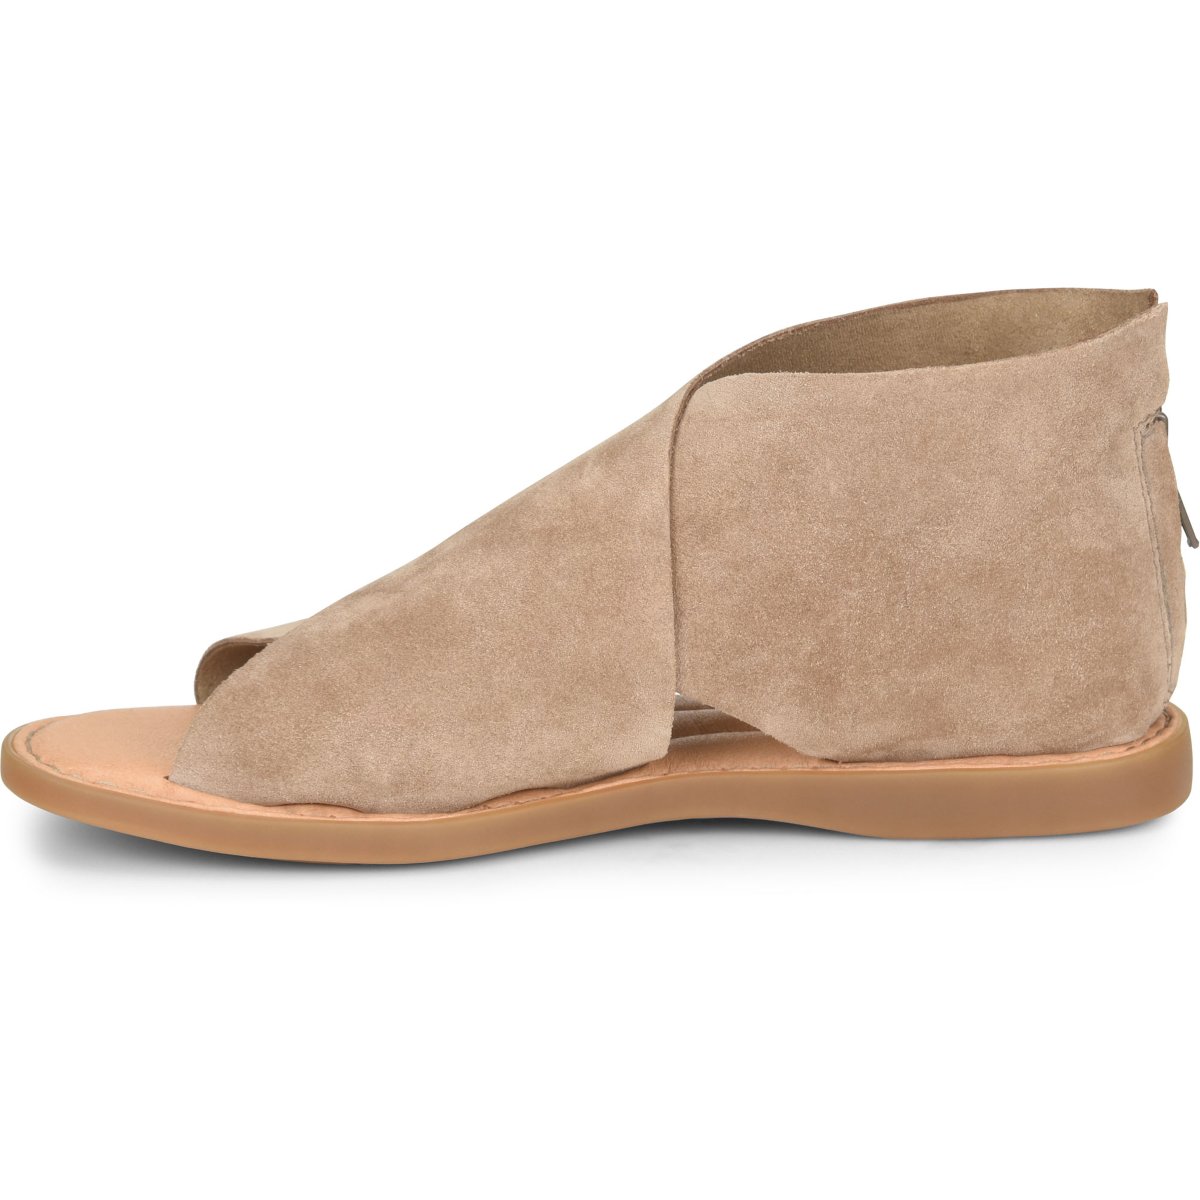 BORN Women's Iwa Sandal Taupe Suede (Beige) - F78017 TAUPE - TAUPE, 7